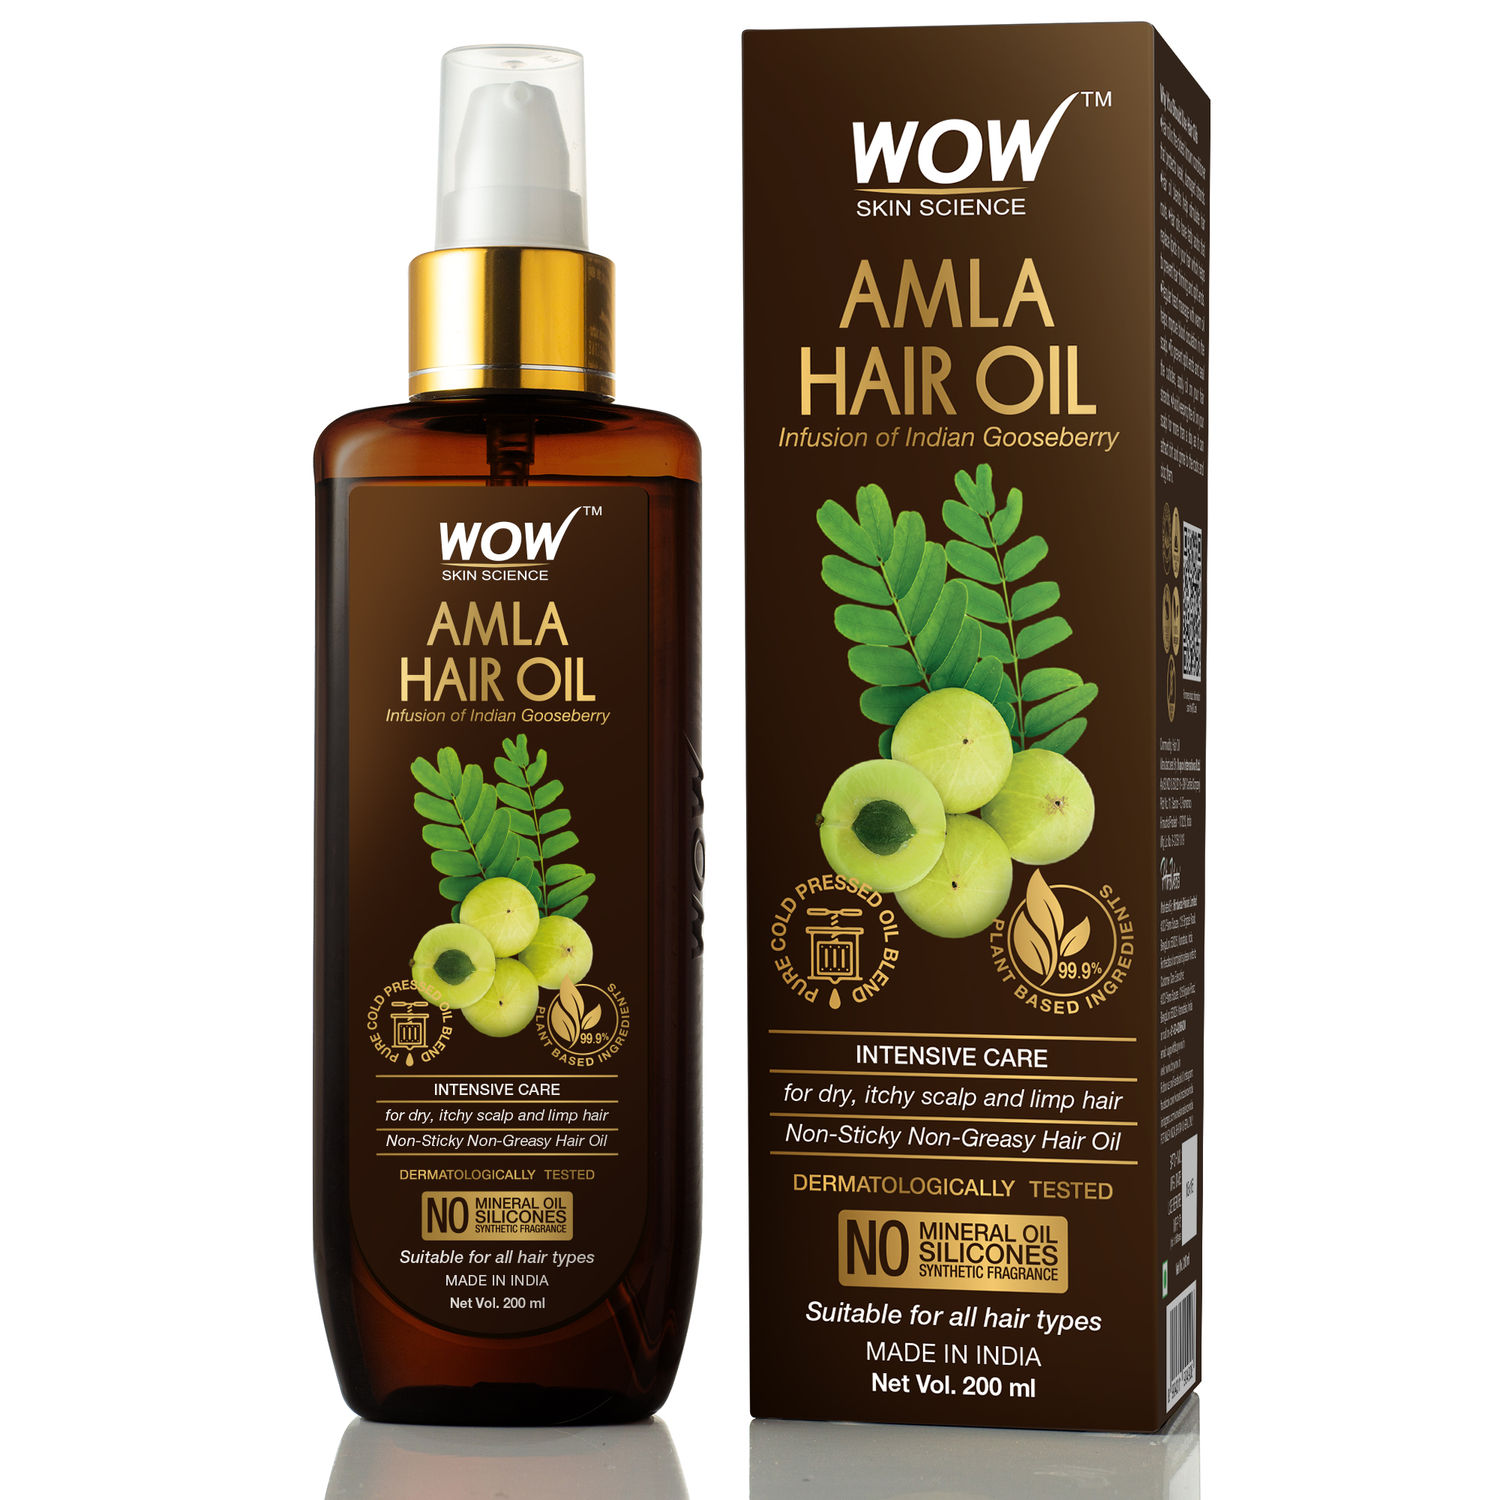 Buy WOW Skin Science Amla Hair Oil - Pure Cold Pressed Indian Gooseberry Oil  - Intensive Hair Care - Non-Sticky & Non-Greasy - No Mineral Oil,  Silicones, Synthetic Fragrance - 200mL Online